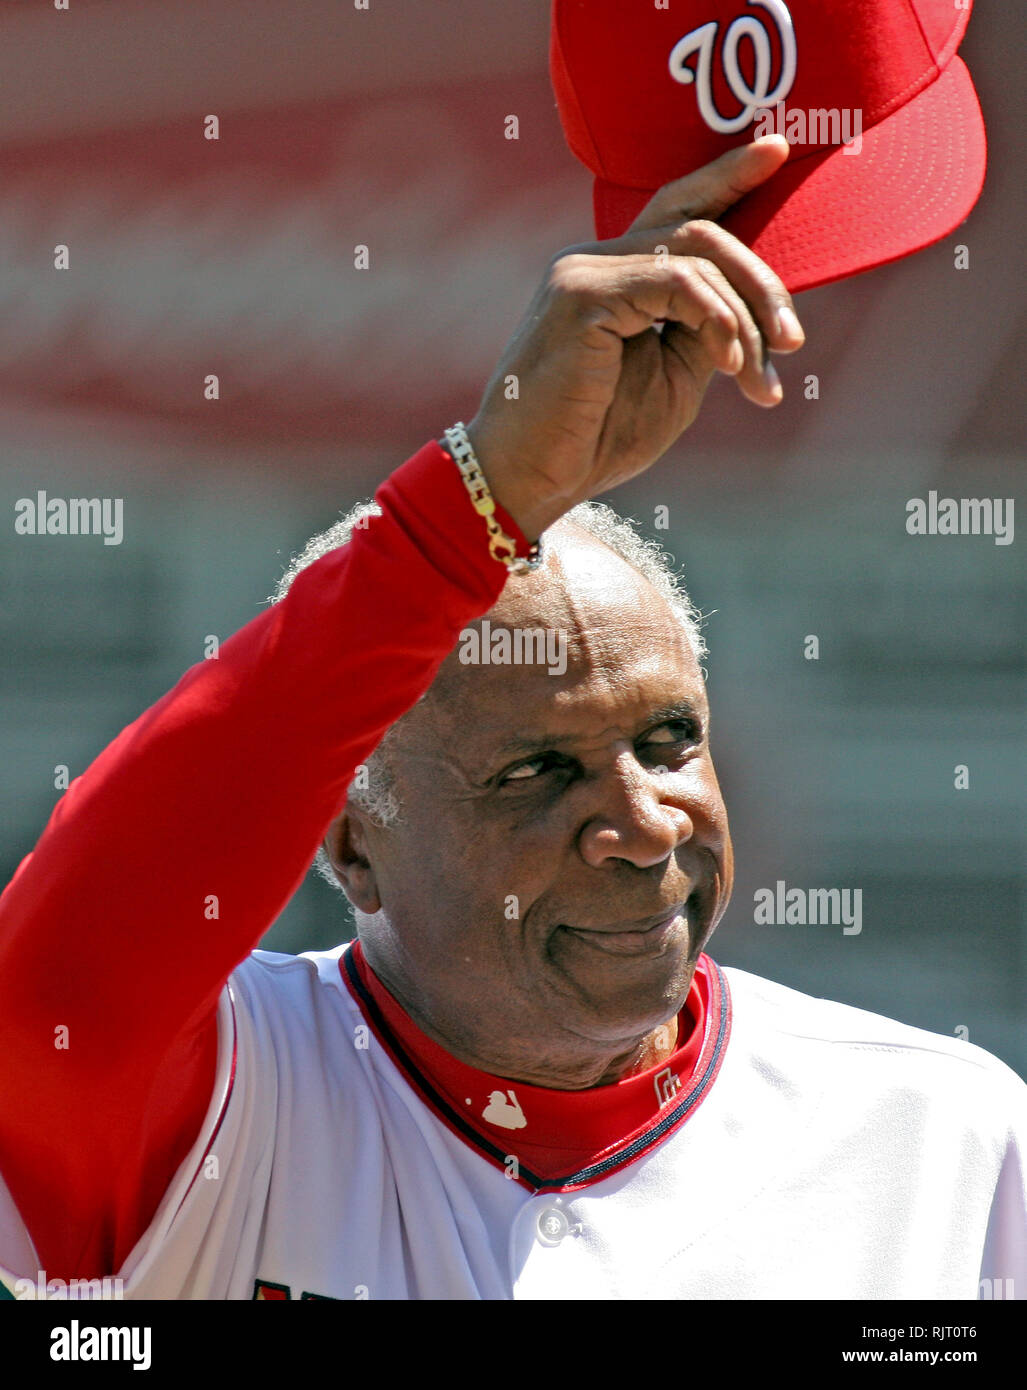 Washington, District of Columbia, USA. 11th Apr, 2006. Washington Nationals manager Frank Robinson (20) acknowledges the cheers of the crowd as his team opens the 2006 home baseball season at RFK Stadium in Washington, DC on April 11, 2006. The Nationals' opponents are the New York Mets. Credit: Arnie Sachs/CNP/ZUMA Wire/Alamy Live News Stock Photo